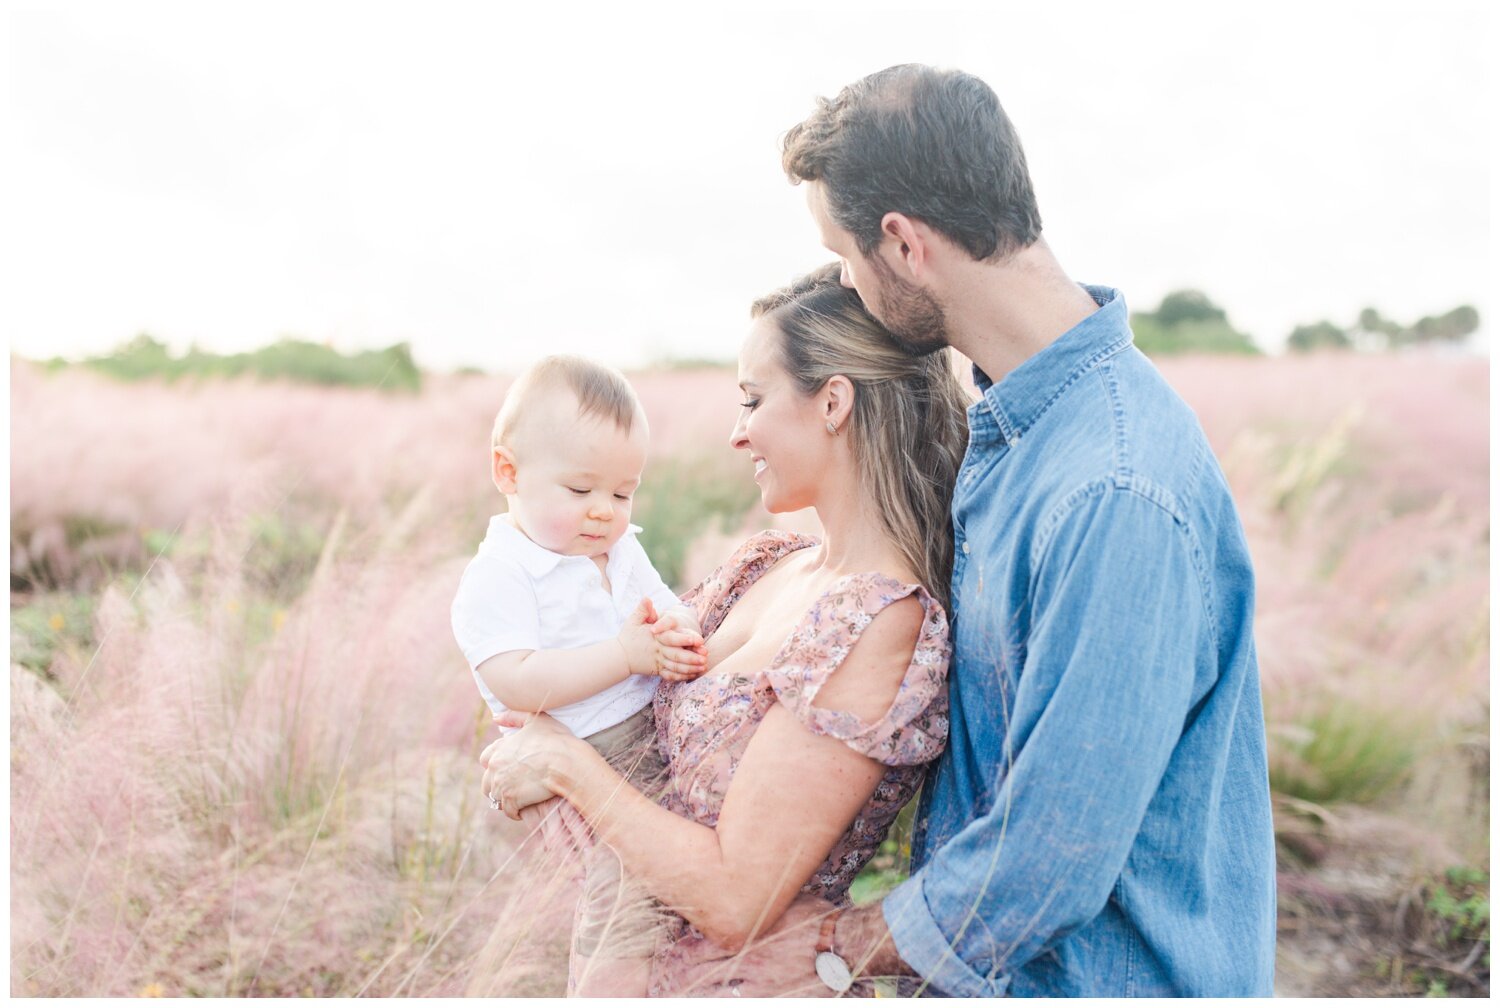 CMageePhotography_Tampa_FamilySession_0012.jpg